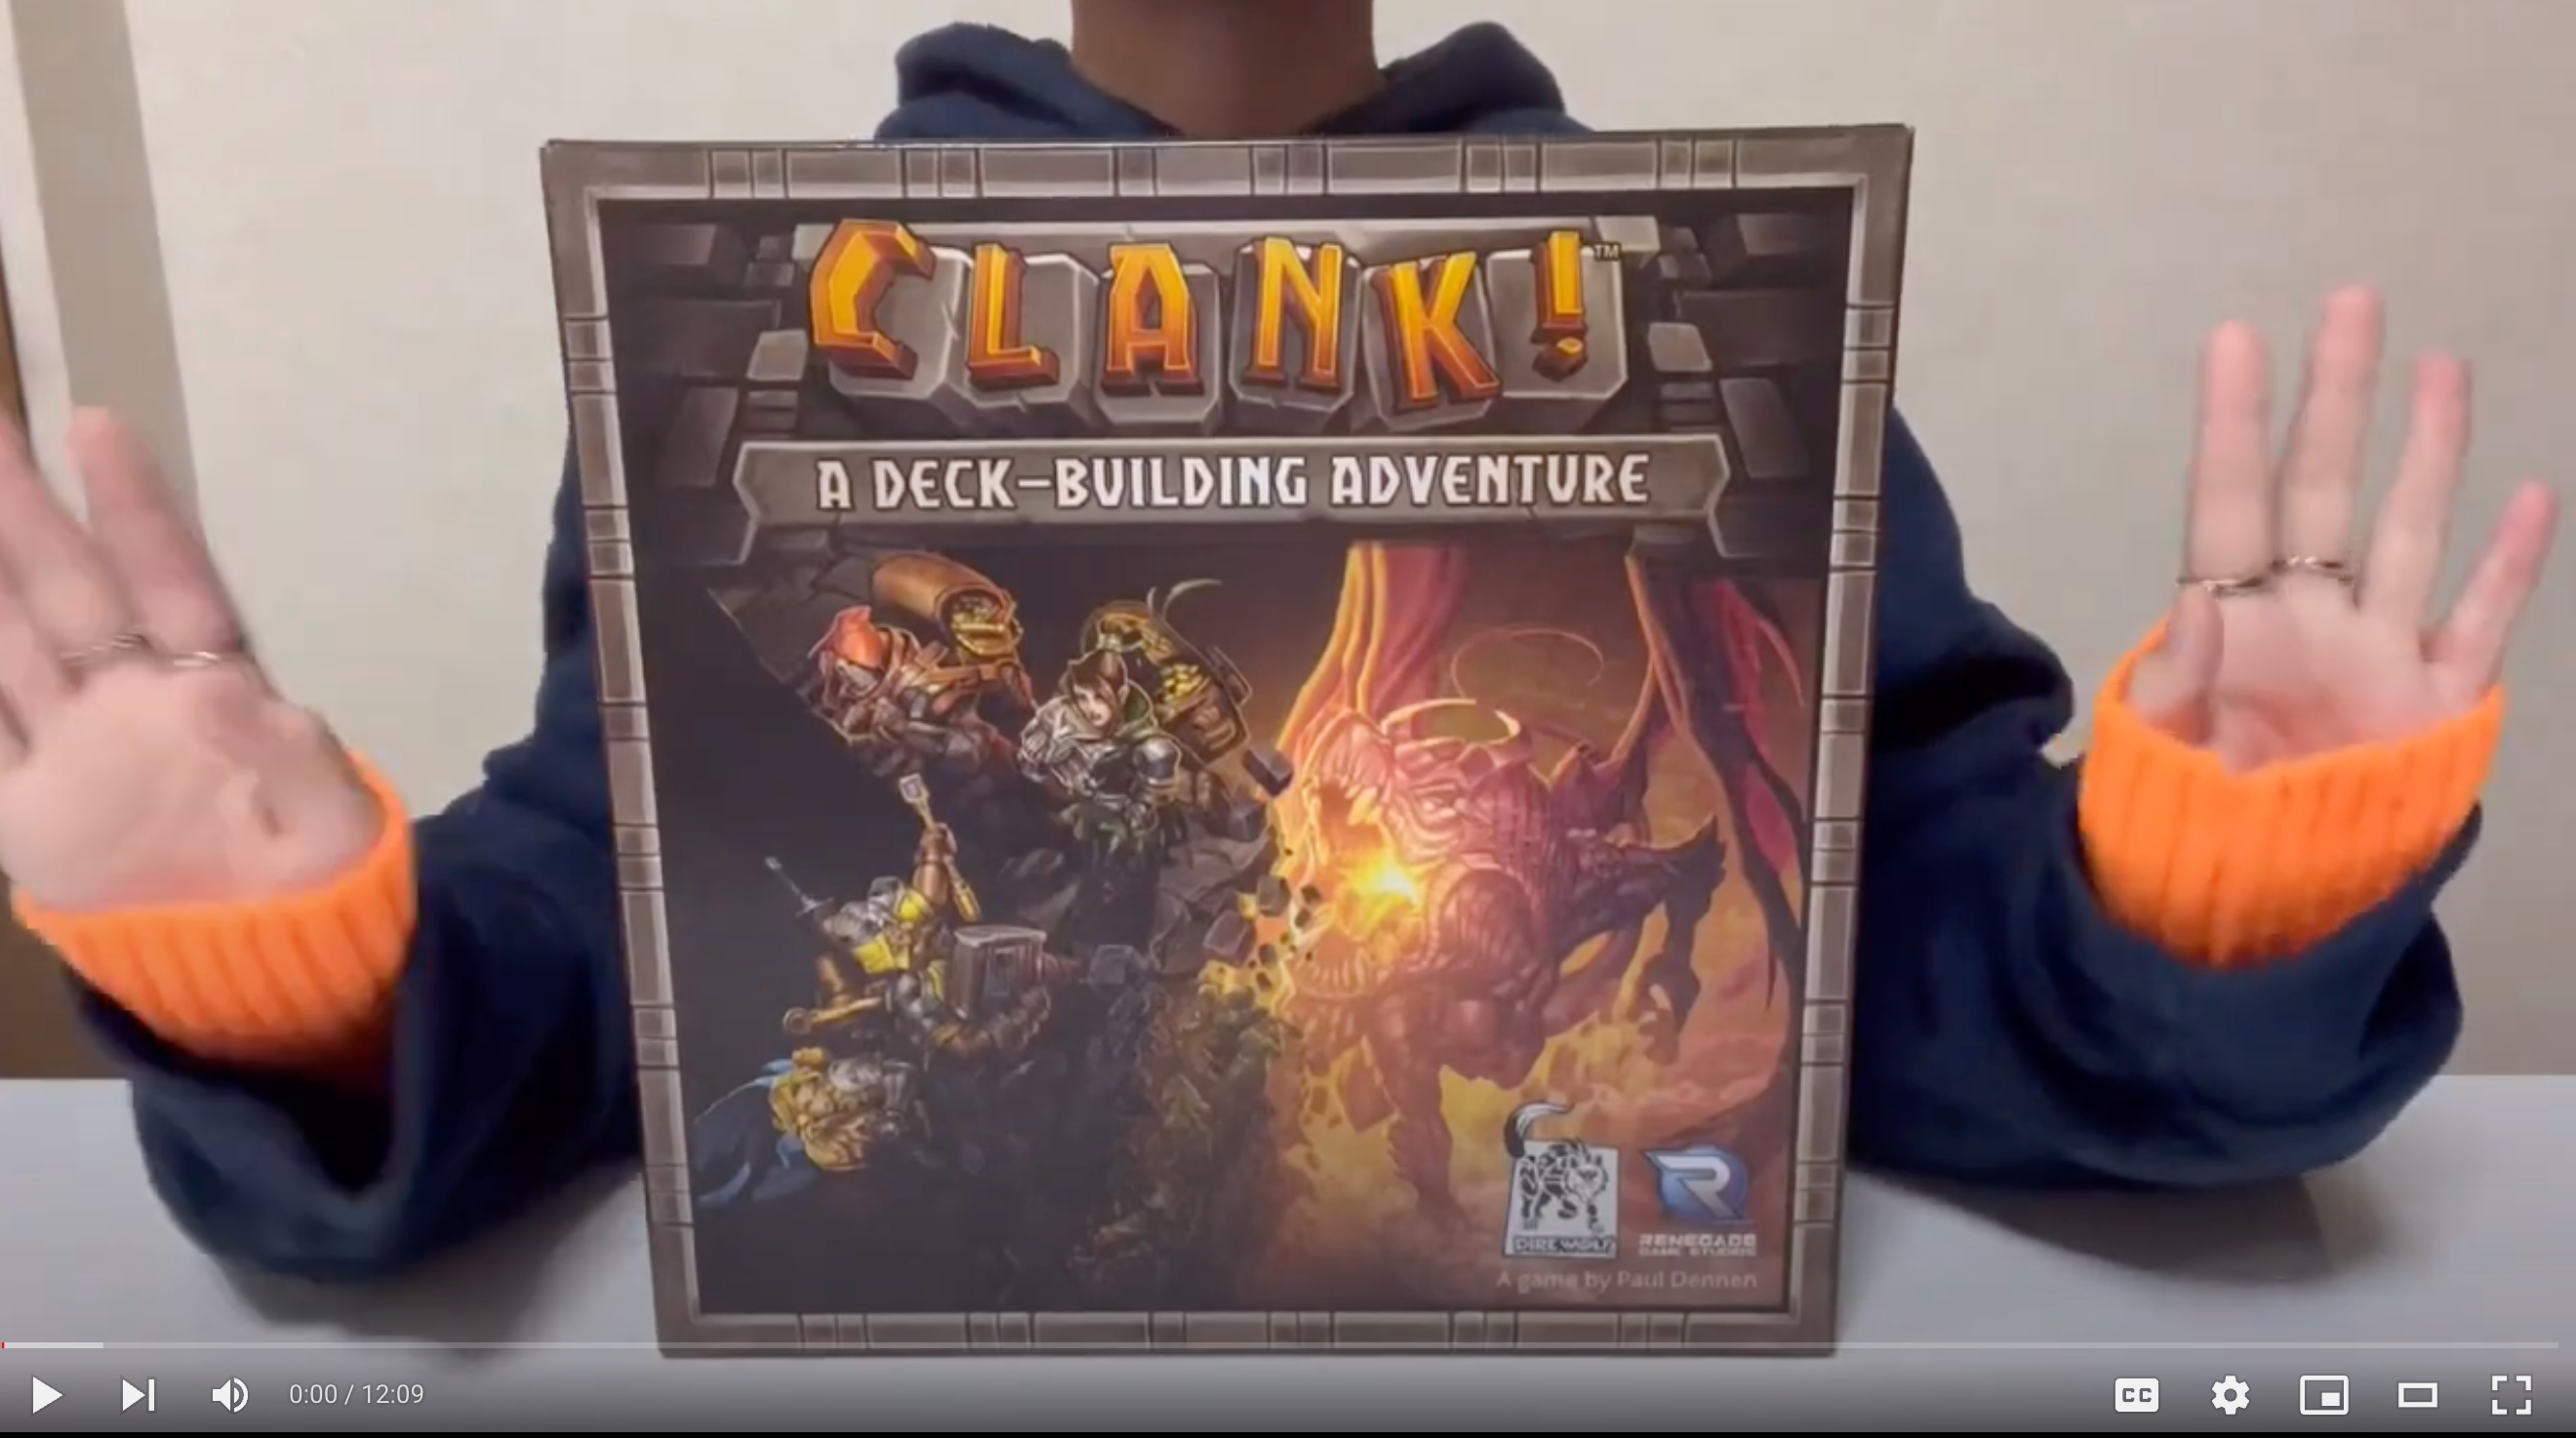 Student Review of Clank!